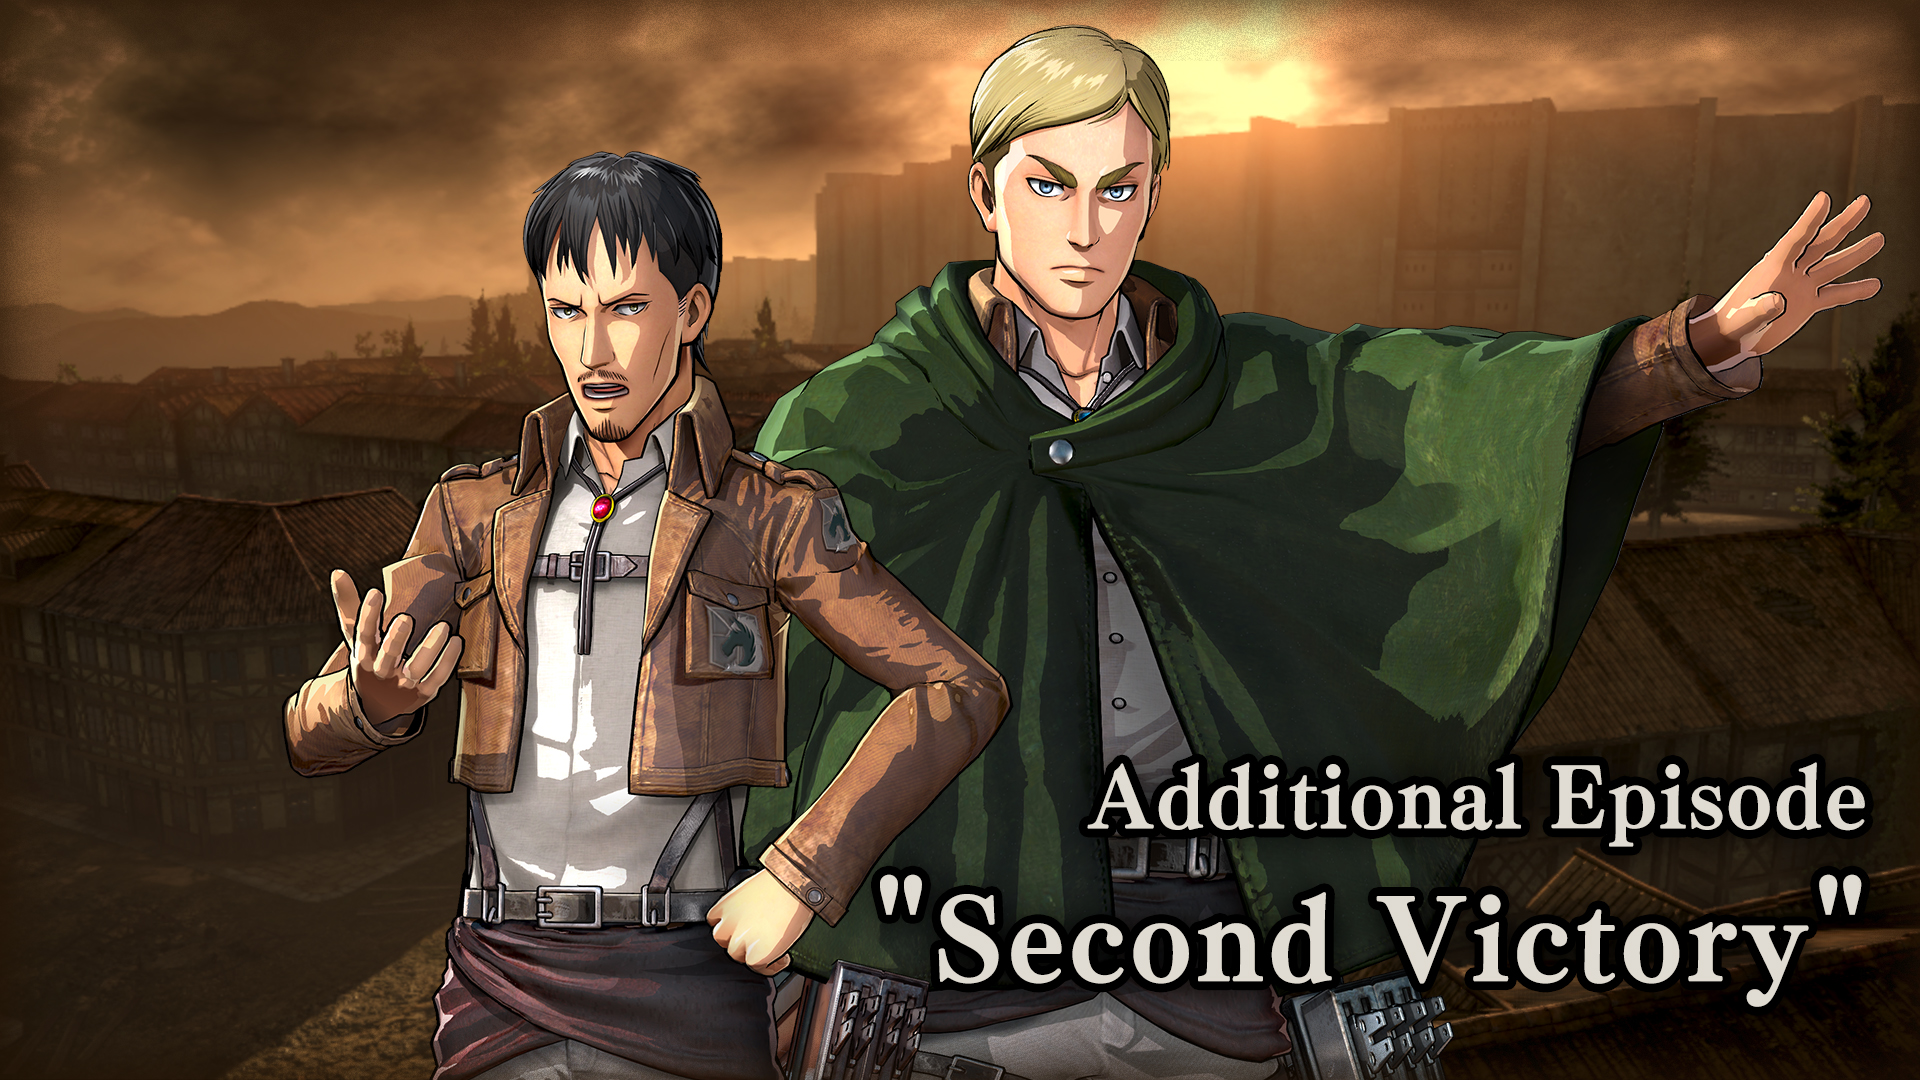 Additional Episode: "Second Victory"